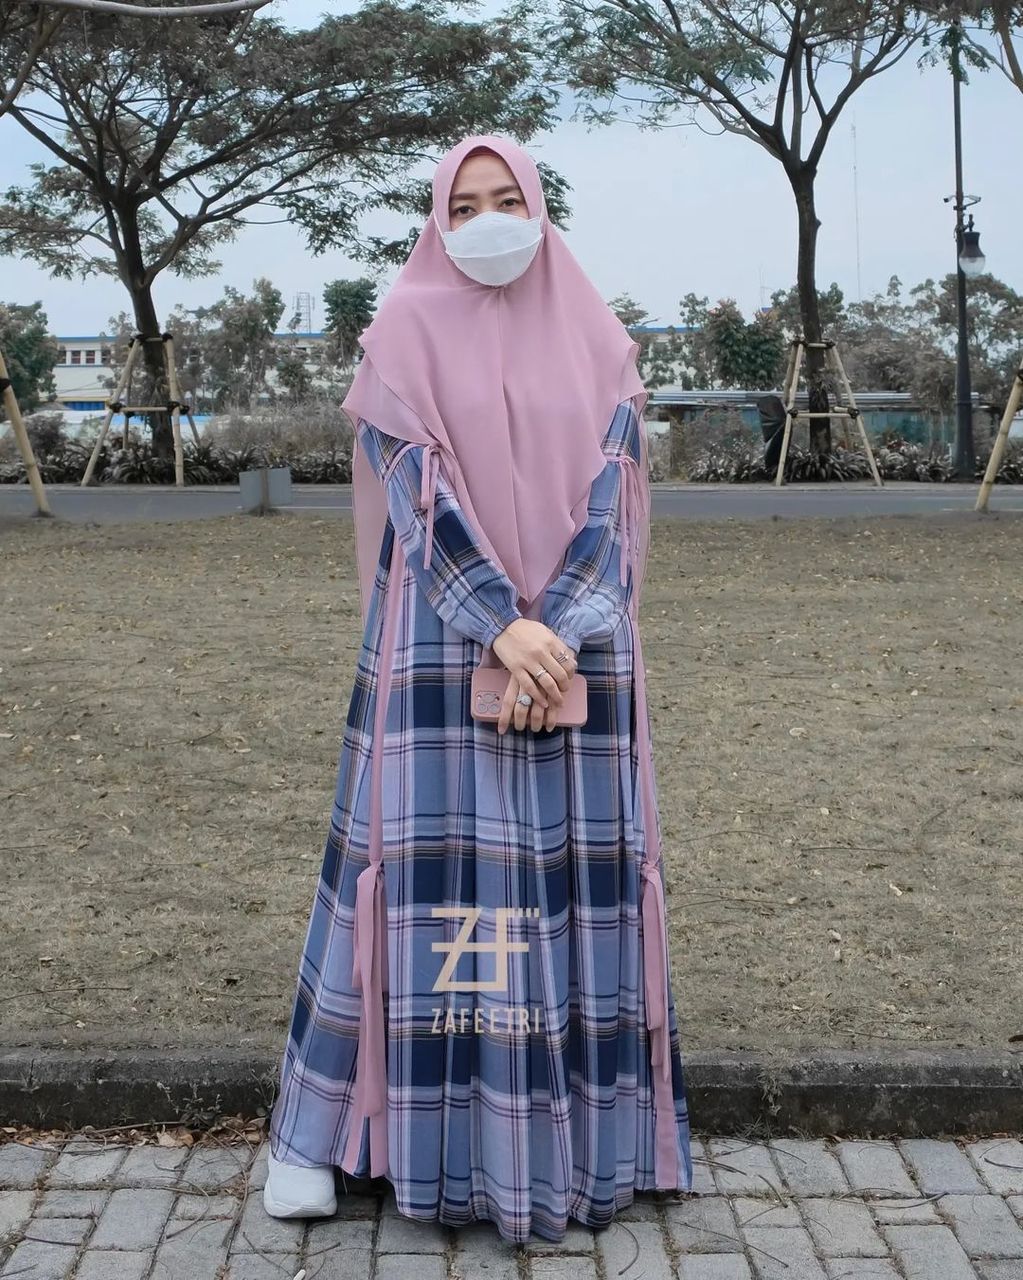 latest model.. muslim hijab online 120$ Hijabstyle  Moeslem Hijabfashion Fashion Hijabbeauty Tree Portrait Full Length Standing Looking At Camera Front View Traditional Clothing Women Sky